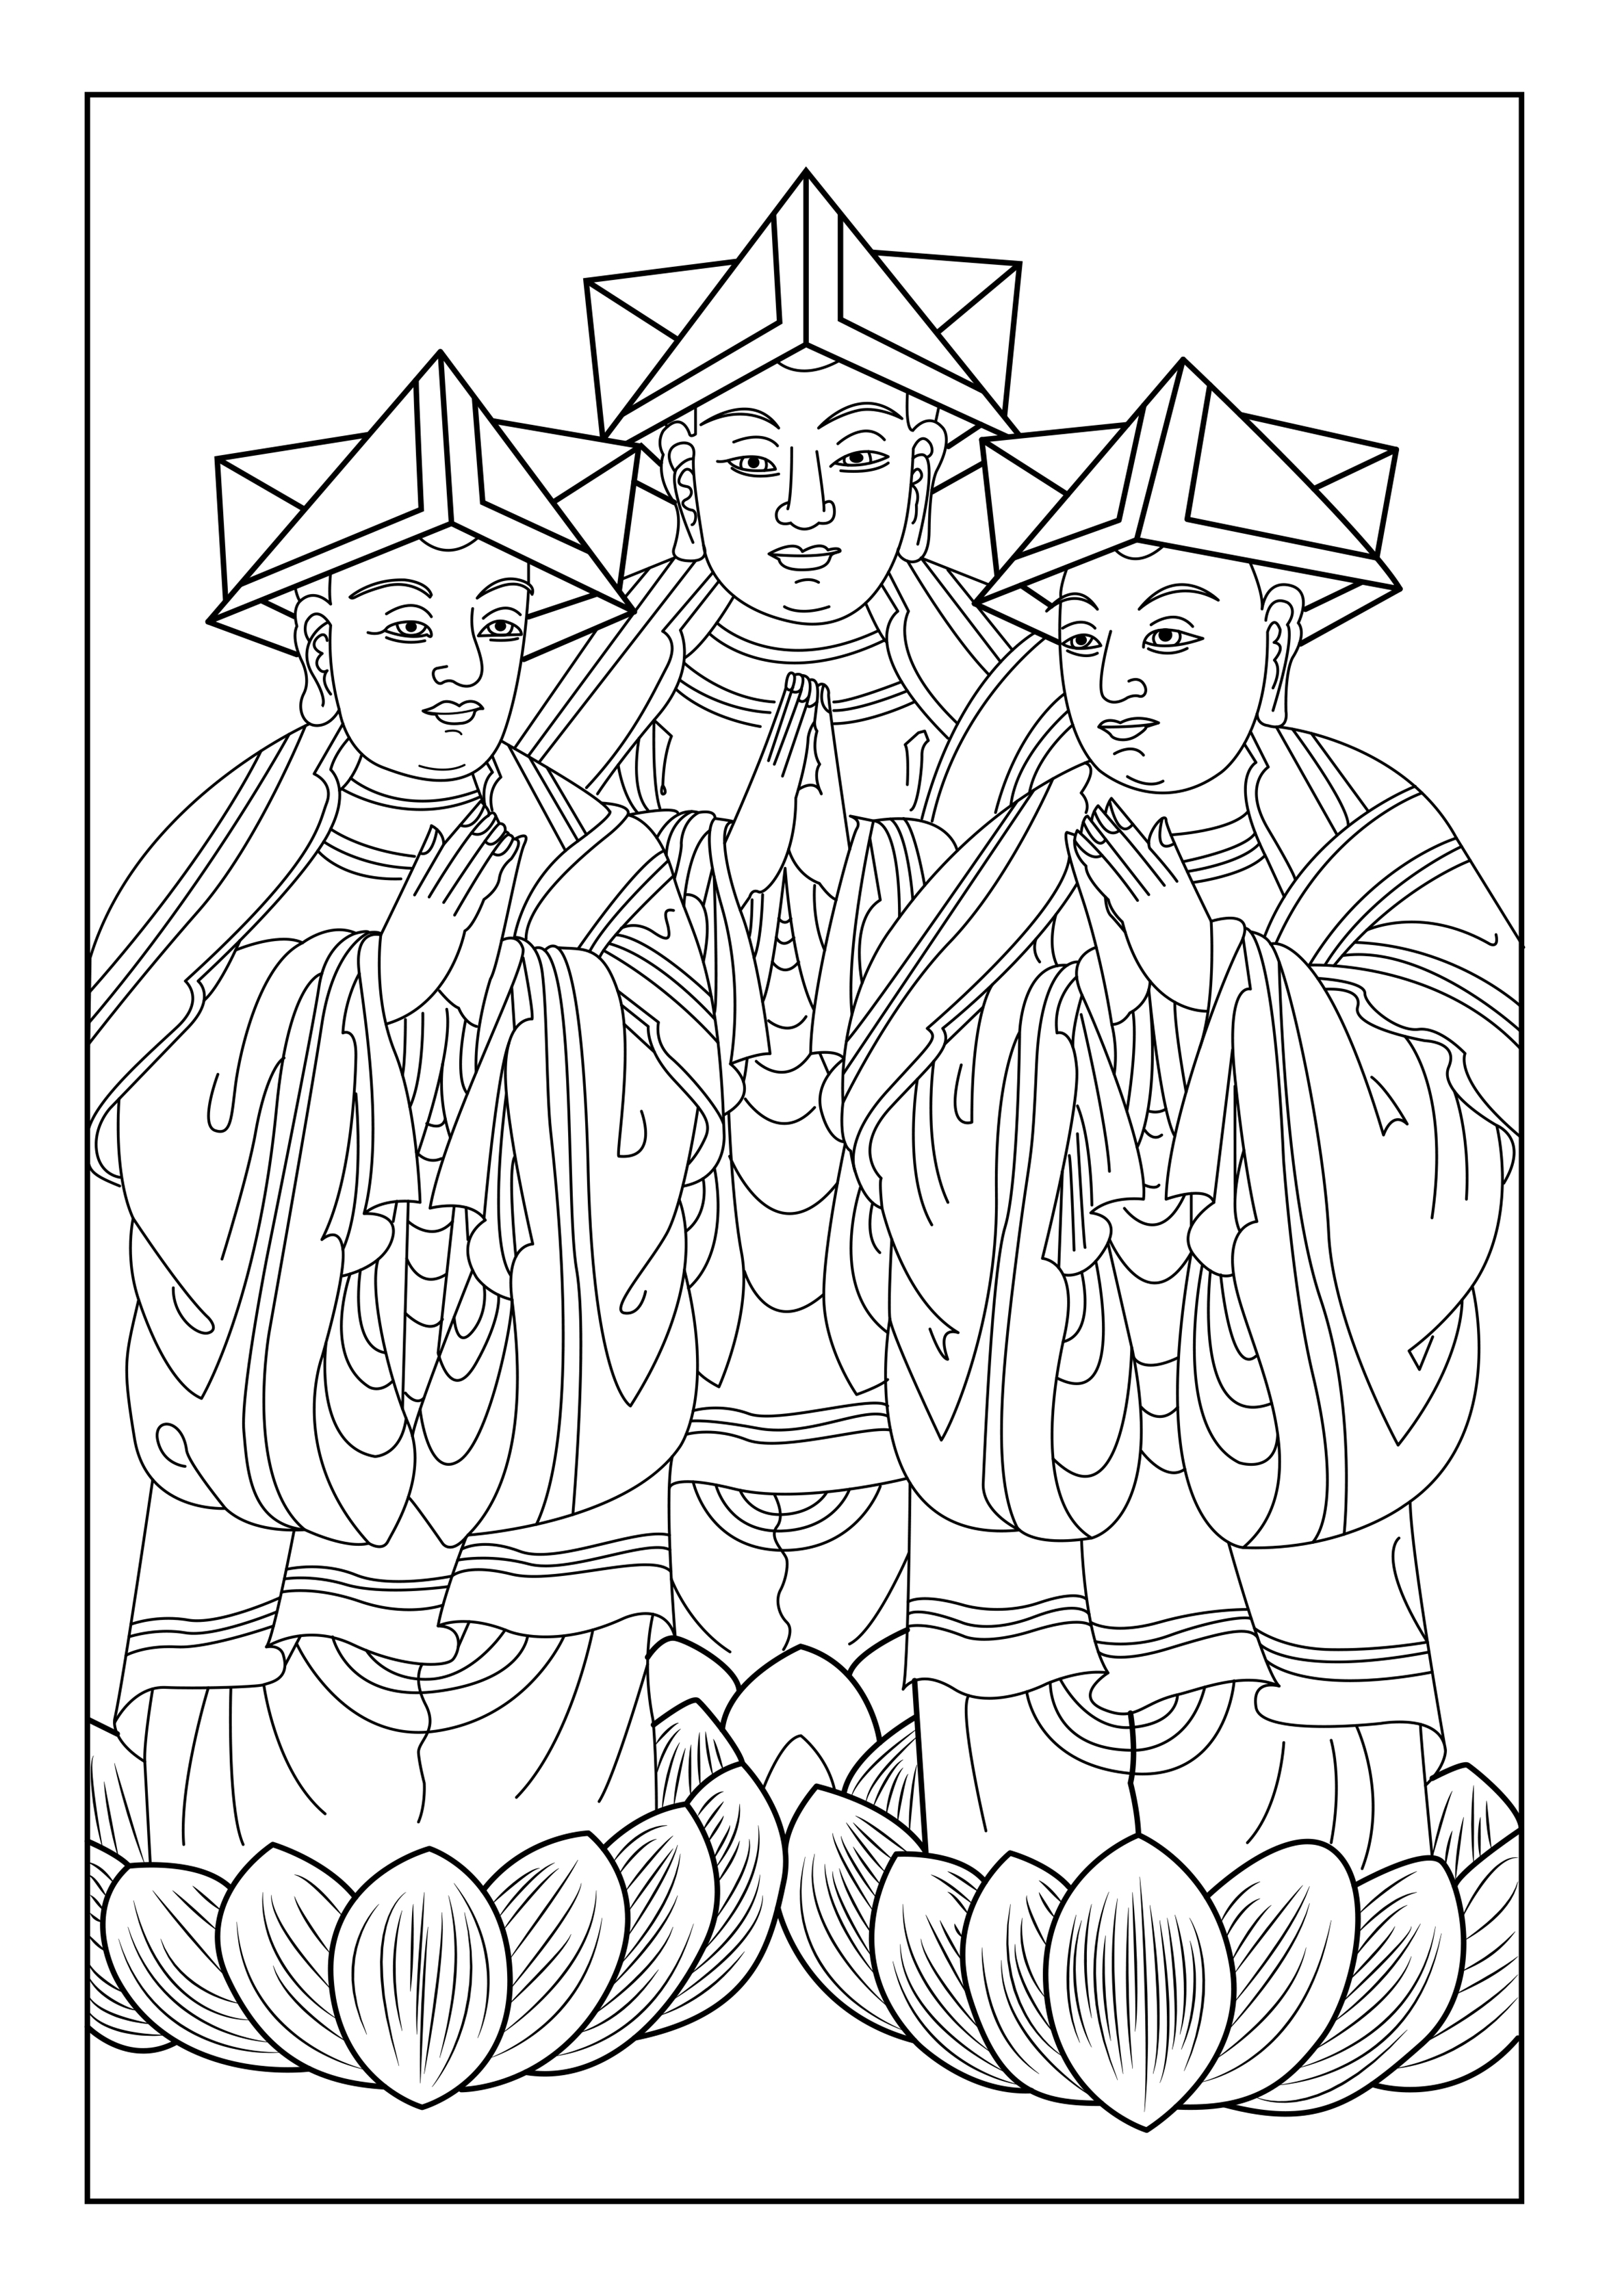 India celine - India Adult Coloring Pages